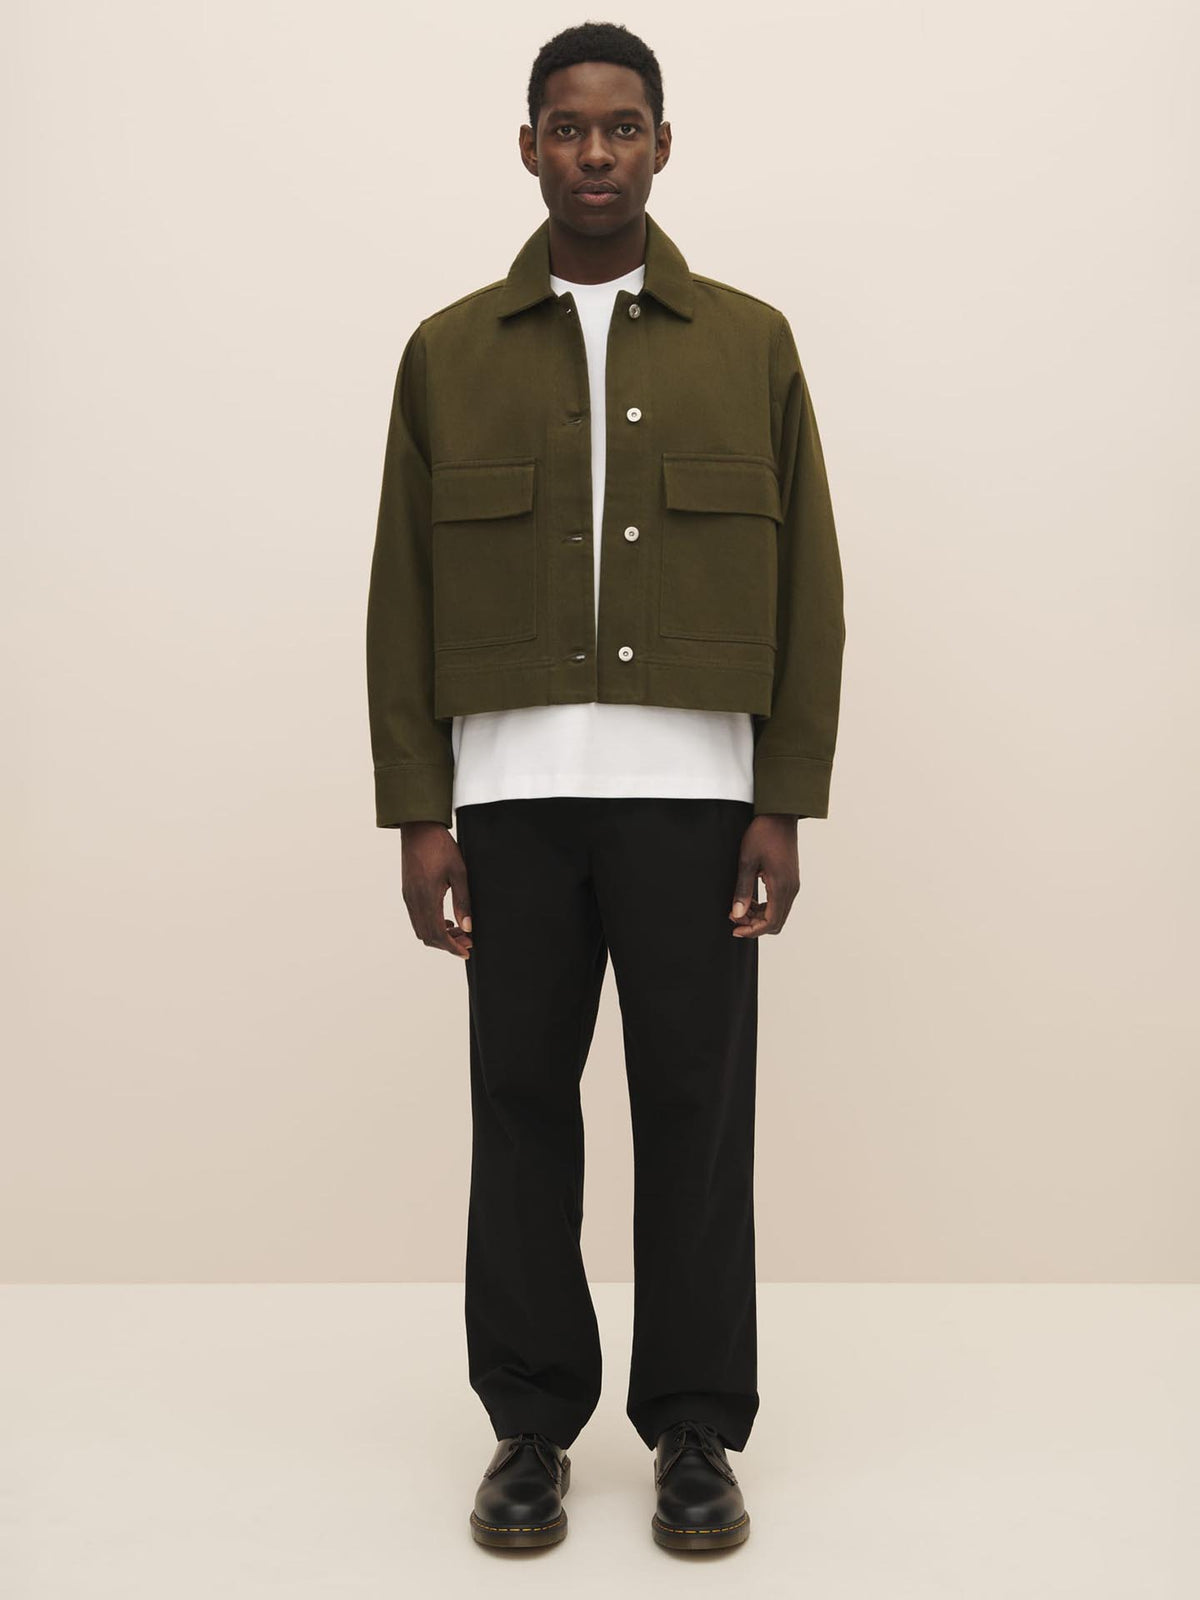 Man standing against a neutral background wearing a Mirror Jacket in Khaki Denim by Kowtow over a white shirt with black trousers and shoes, perfectly matching the size guide for an ideal fit.